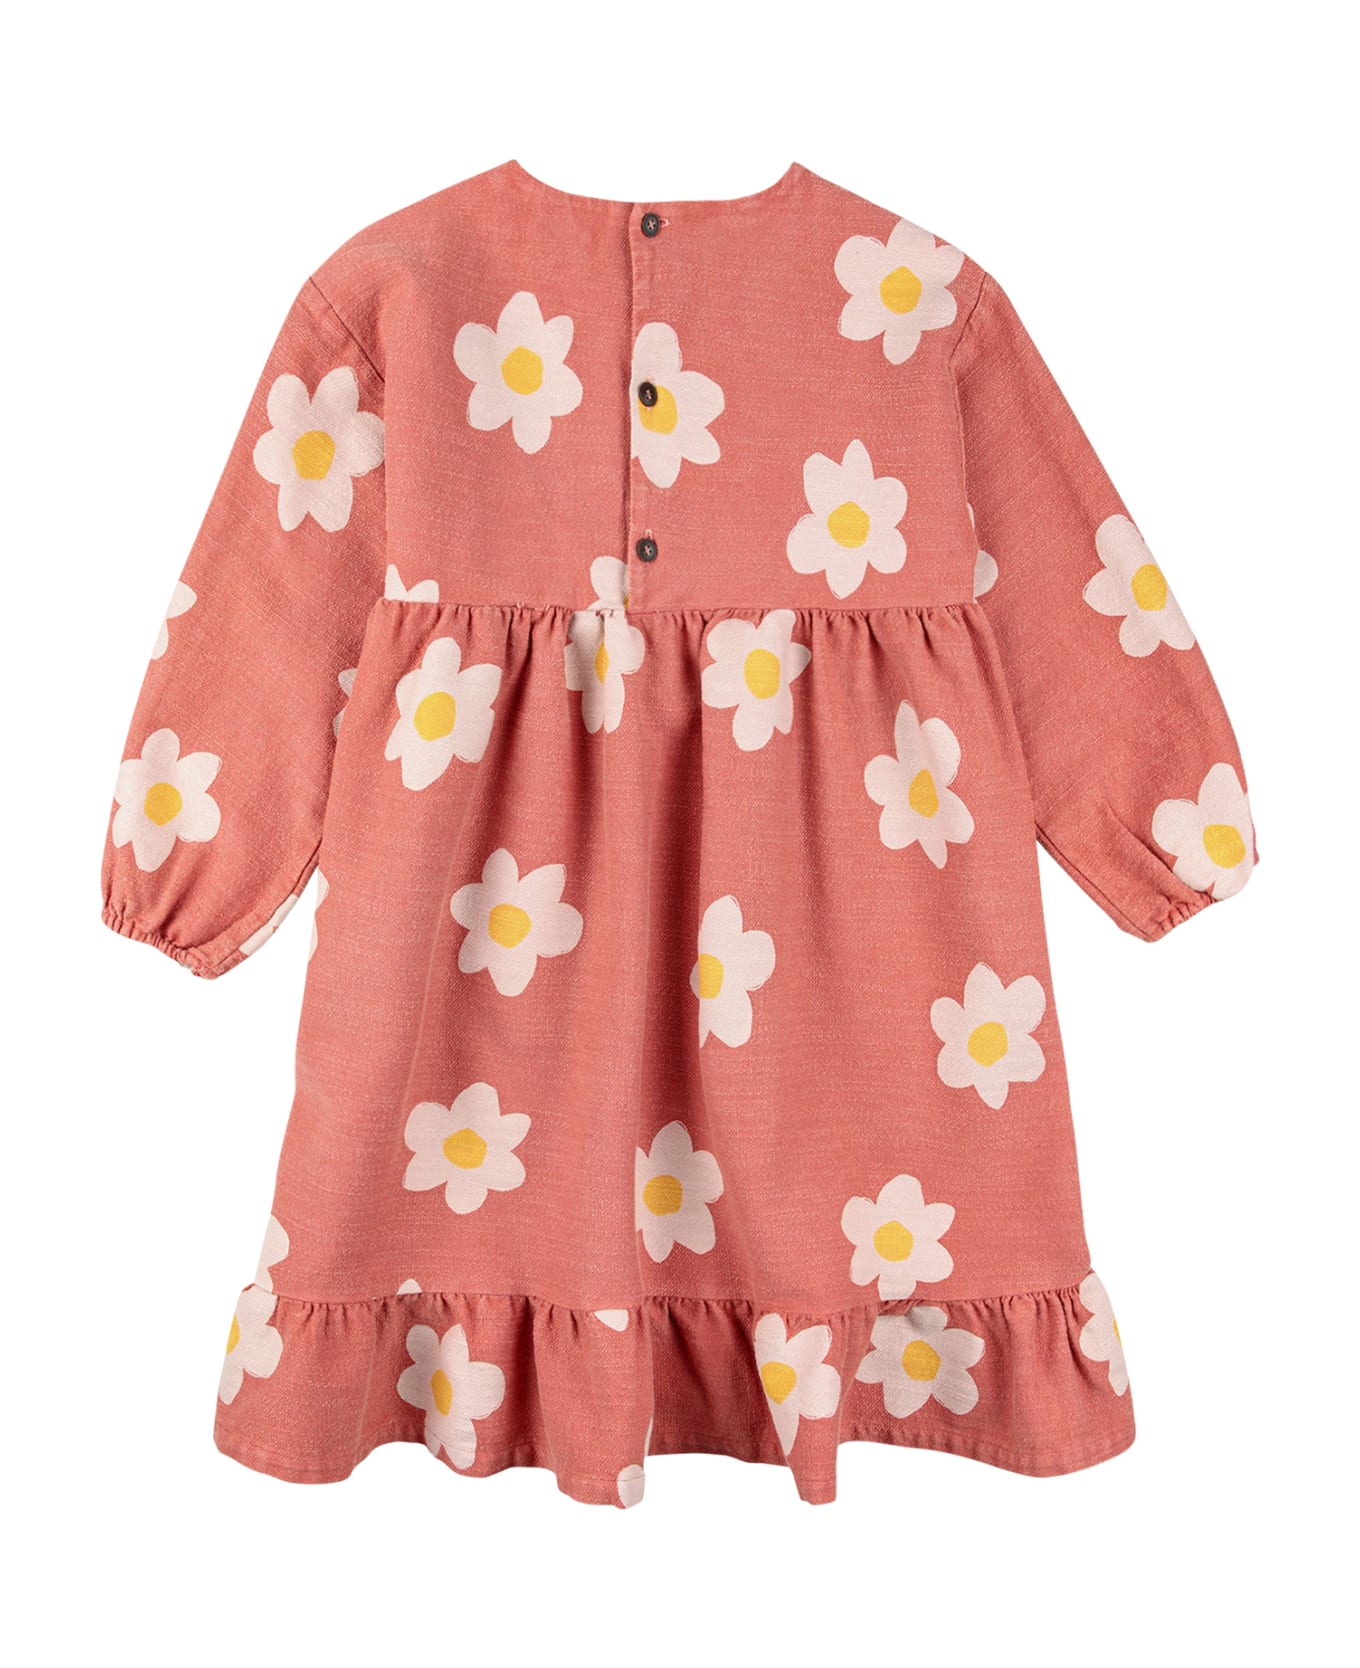 Bobo Choses Pink Dress For Girl With Daisies - Pink